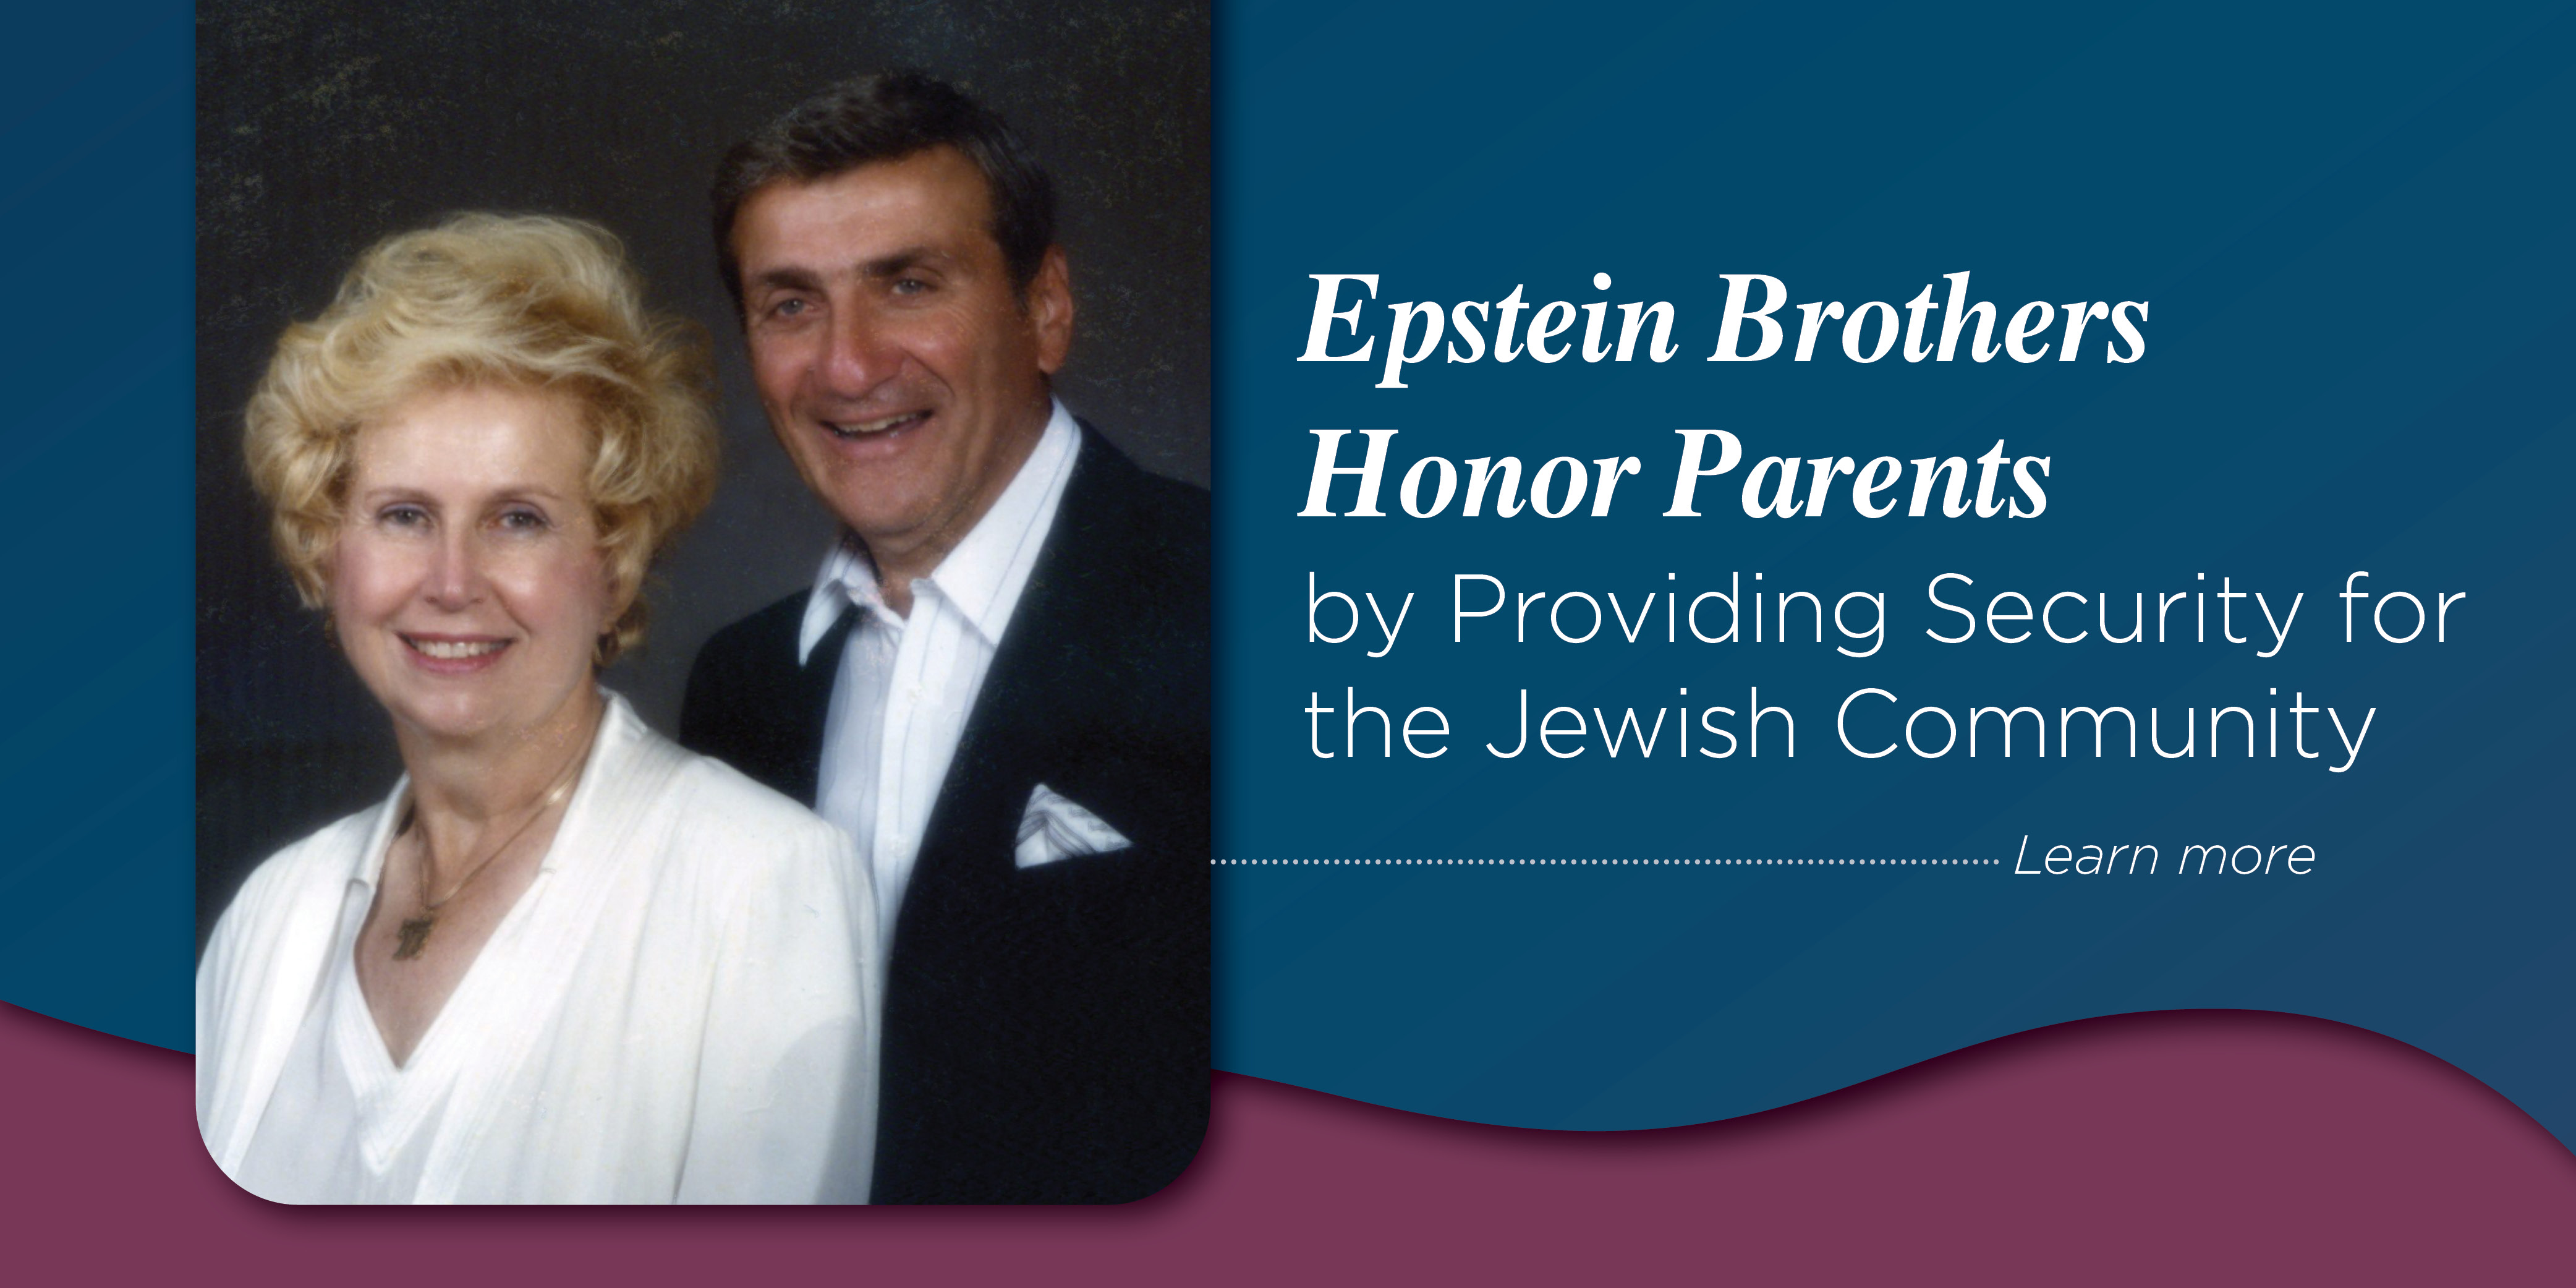 Epstein Brothers Honor Parents